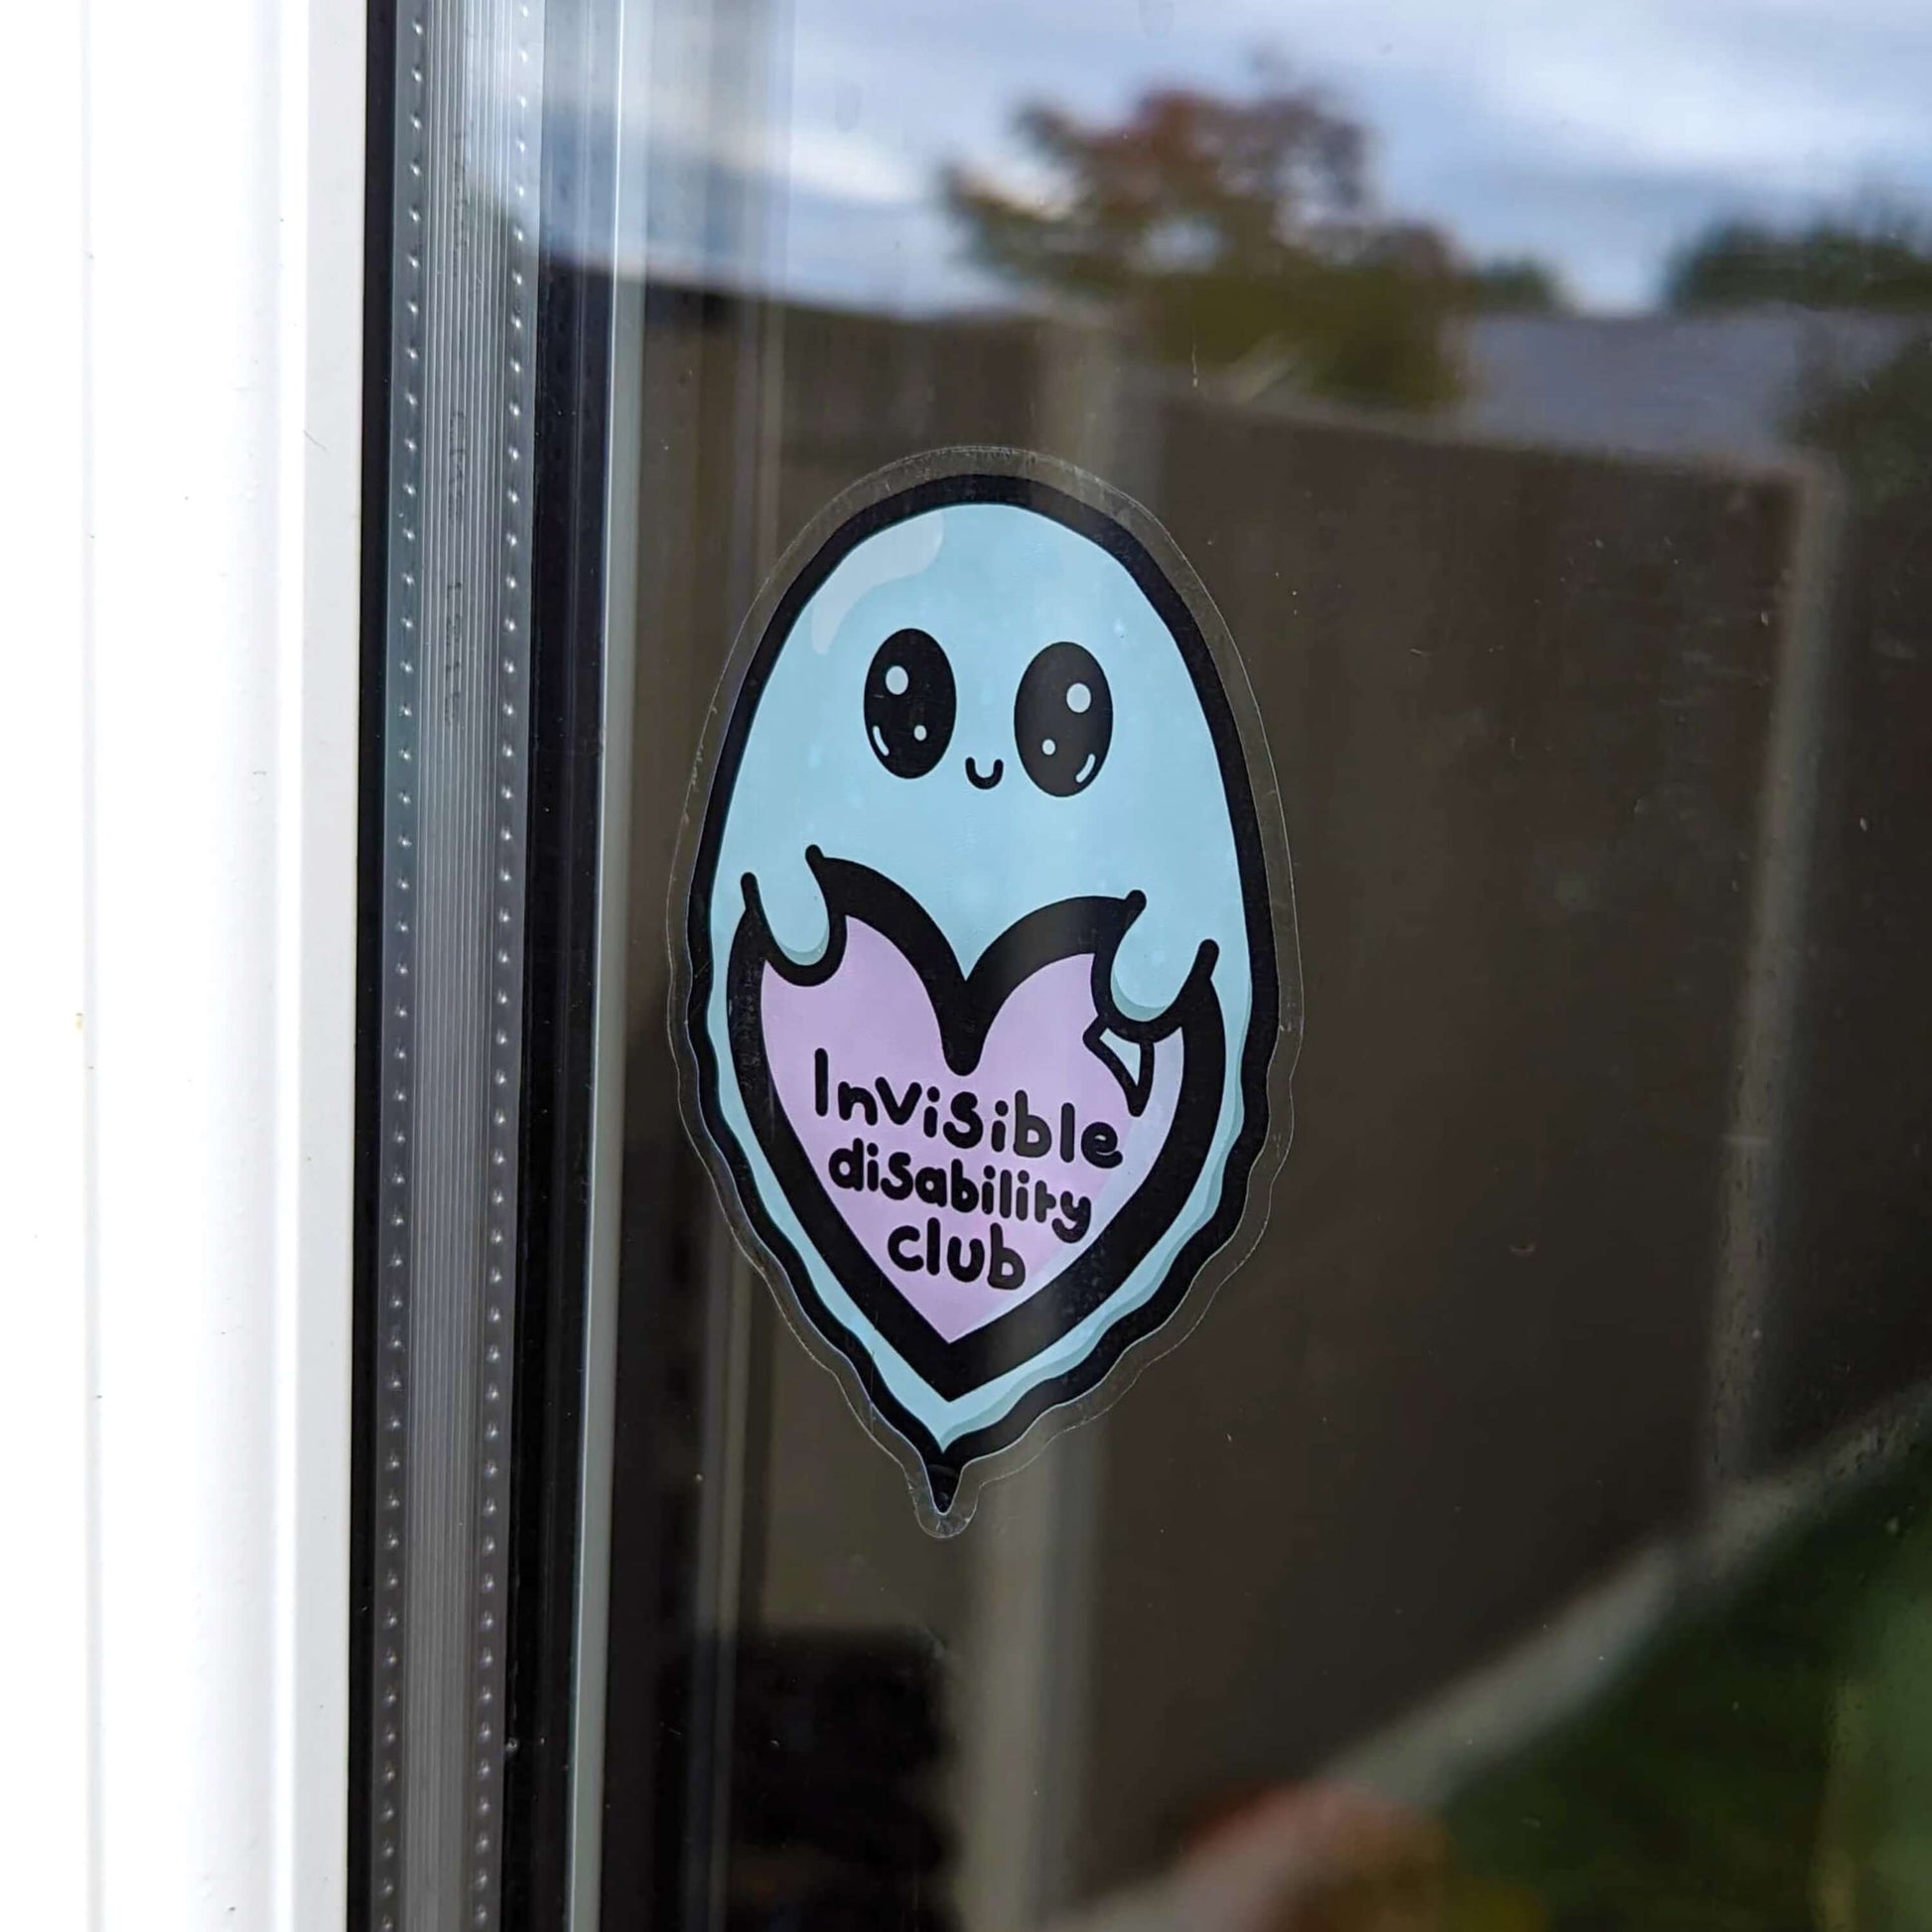  The Invisible Disability Club Ghost Window Cling on a house back door window. The pastel blue smiling Ghost window sticker has big sparkly eyes holding a pastel pink heart with black text reading 'invisible disability club'. The hand drawn design is raising awareness for hidden disabilities and invisible illnesses.